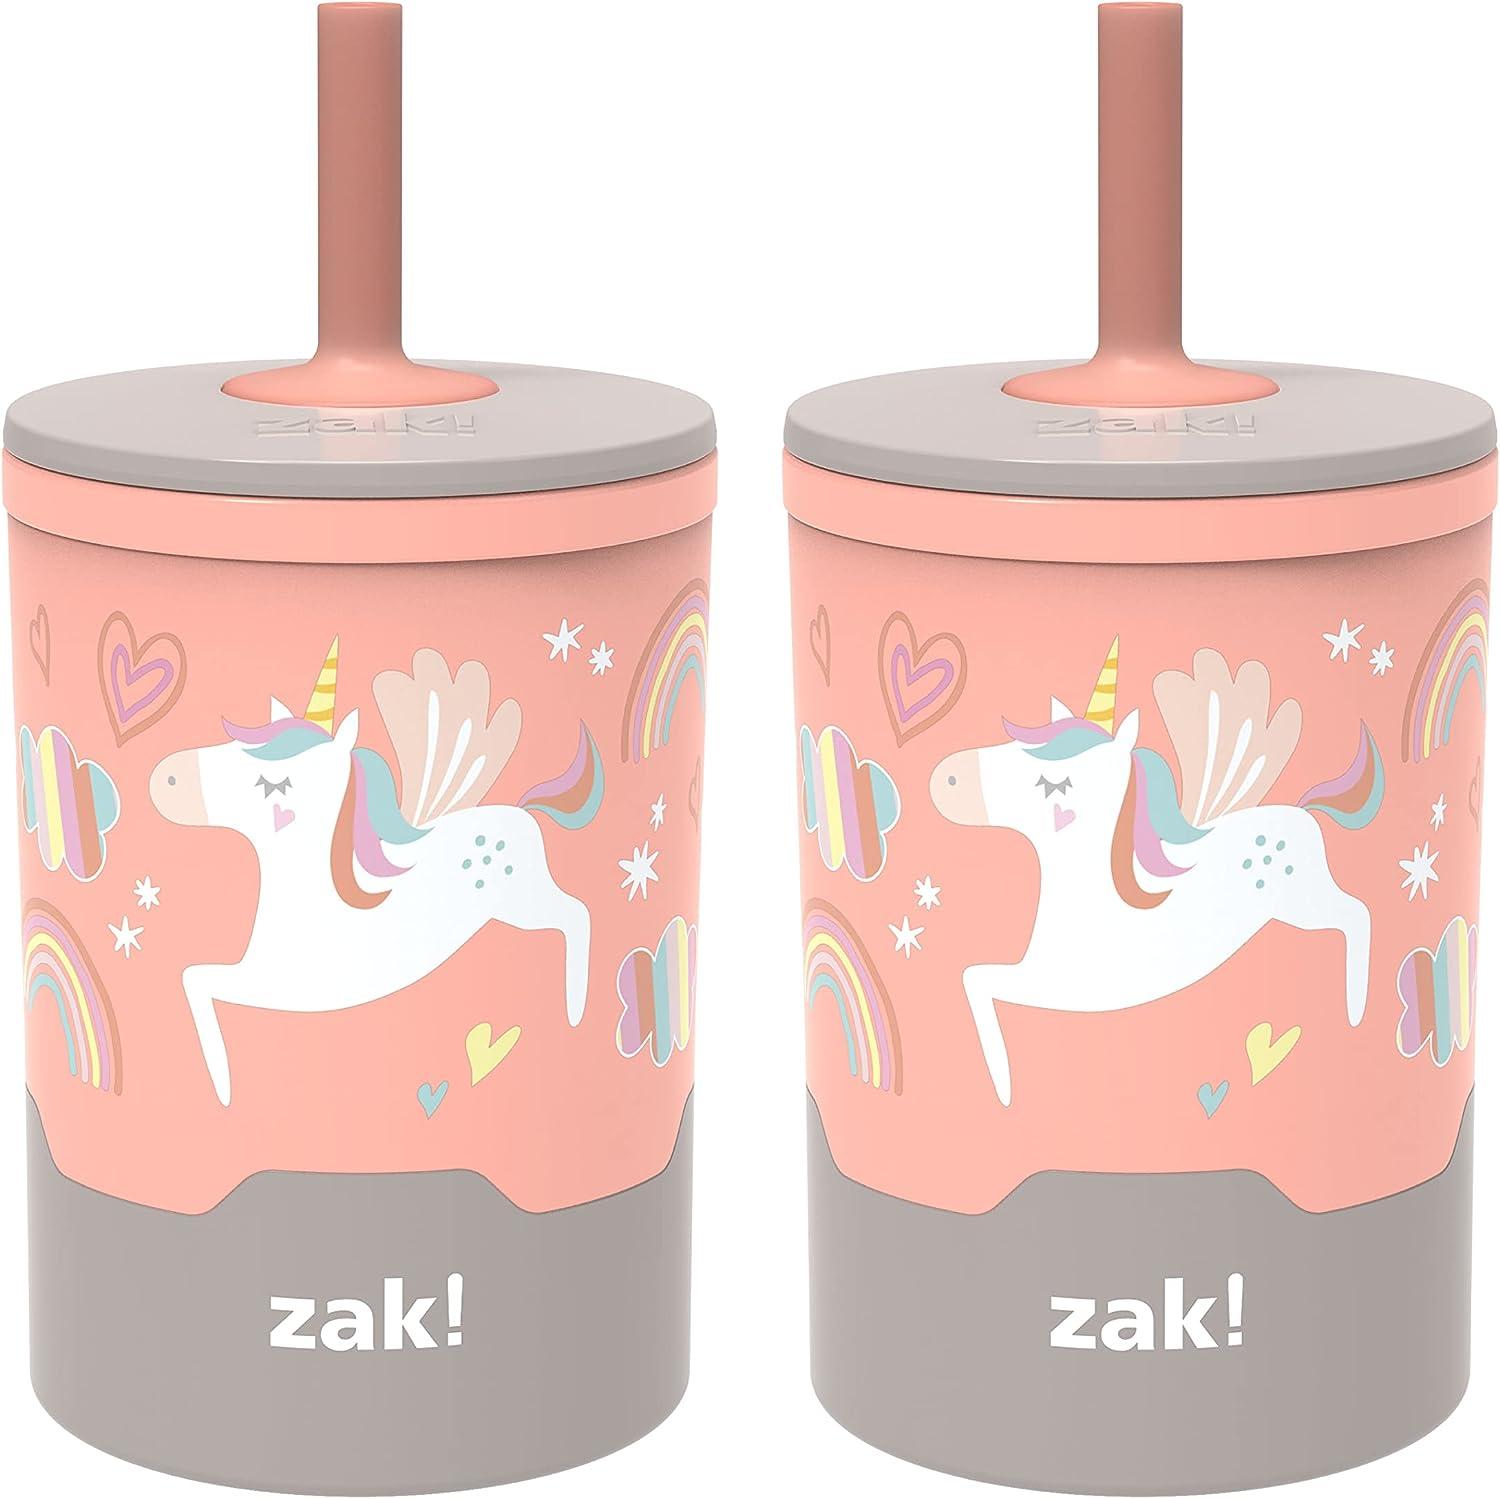 Do you use Zak straw cups? Zak tumblers are one of my favorite